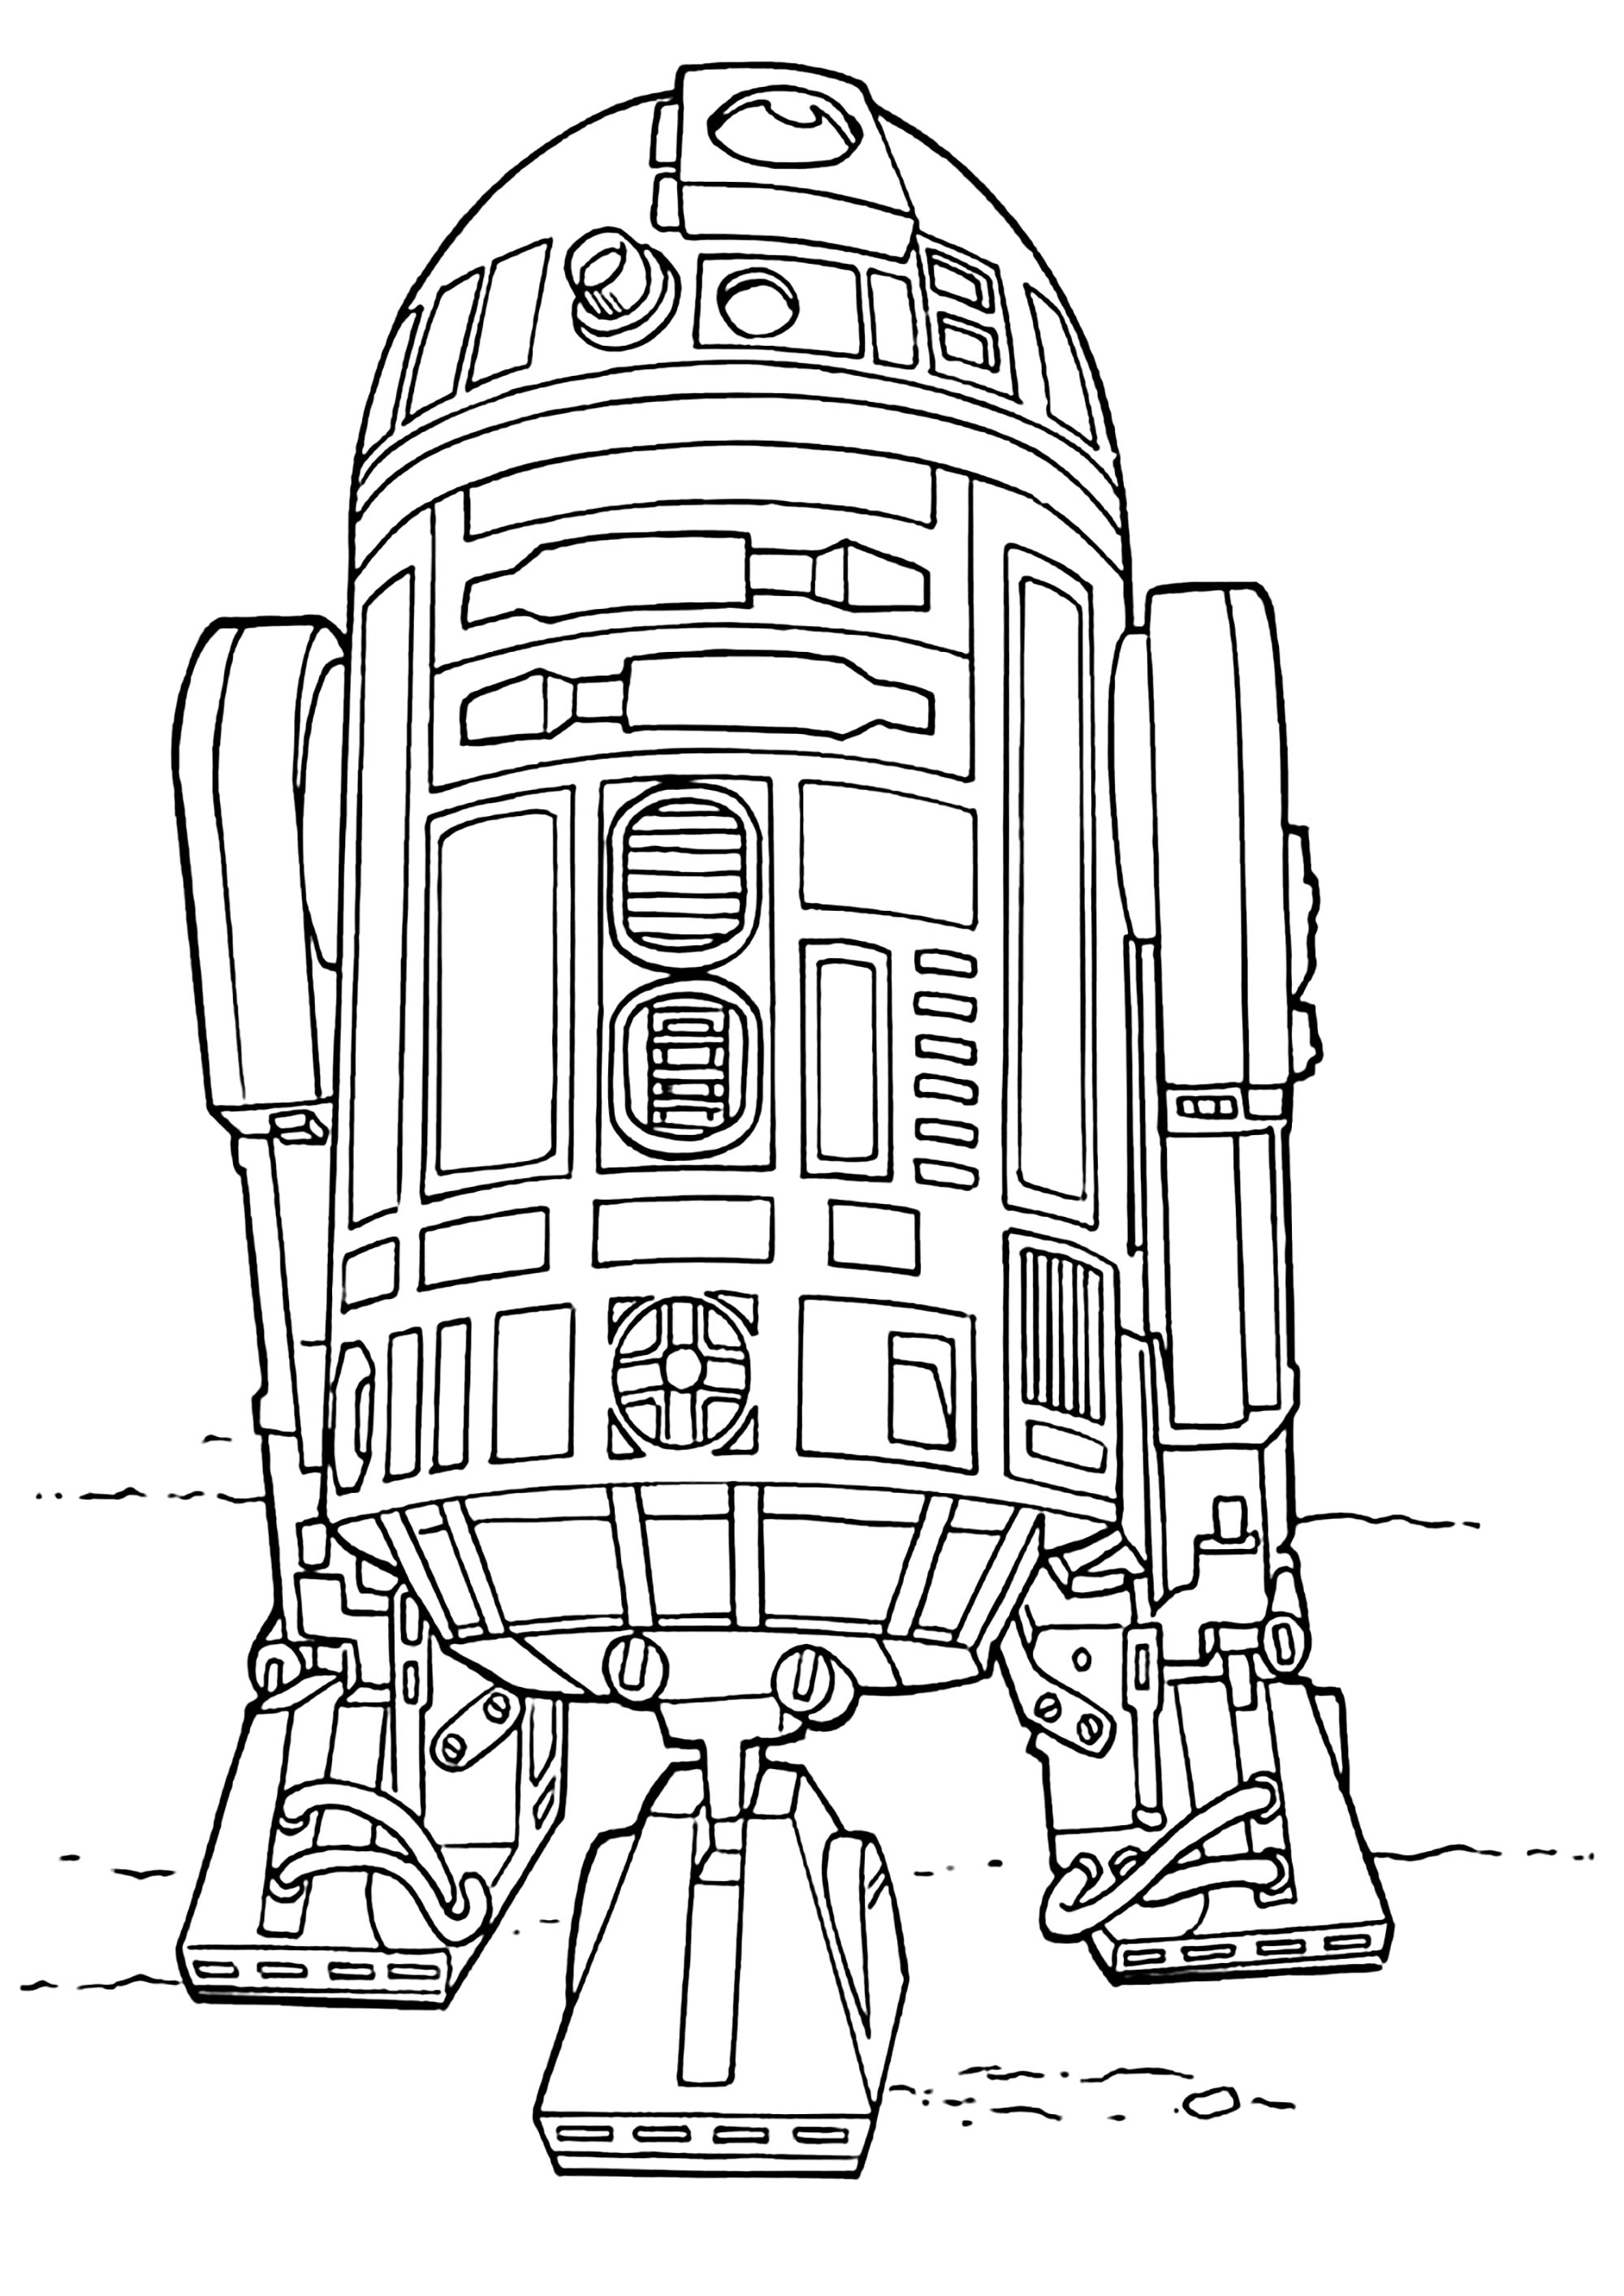 Download Star wars to color for kids - Star Wars Kids Coloring Pages